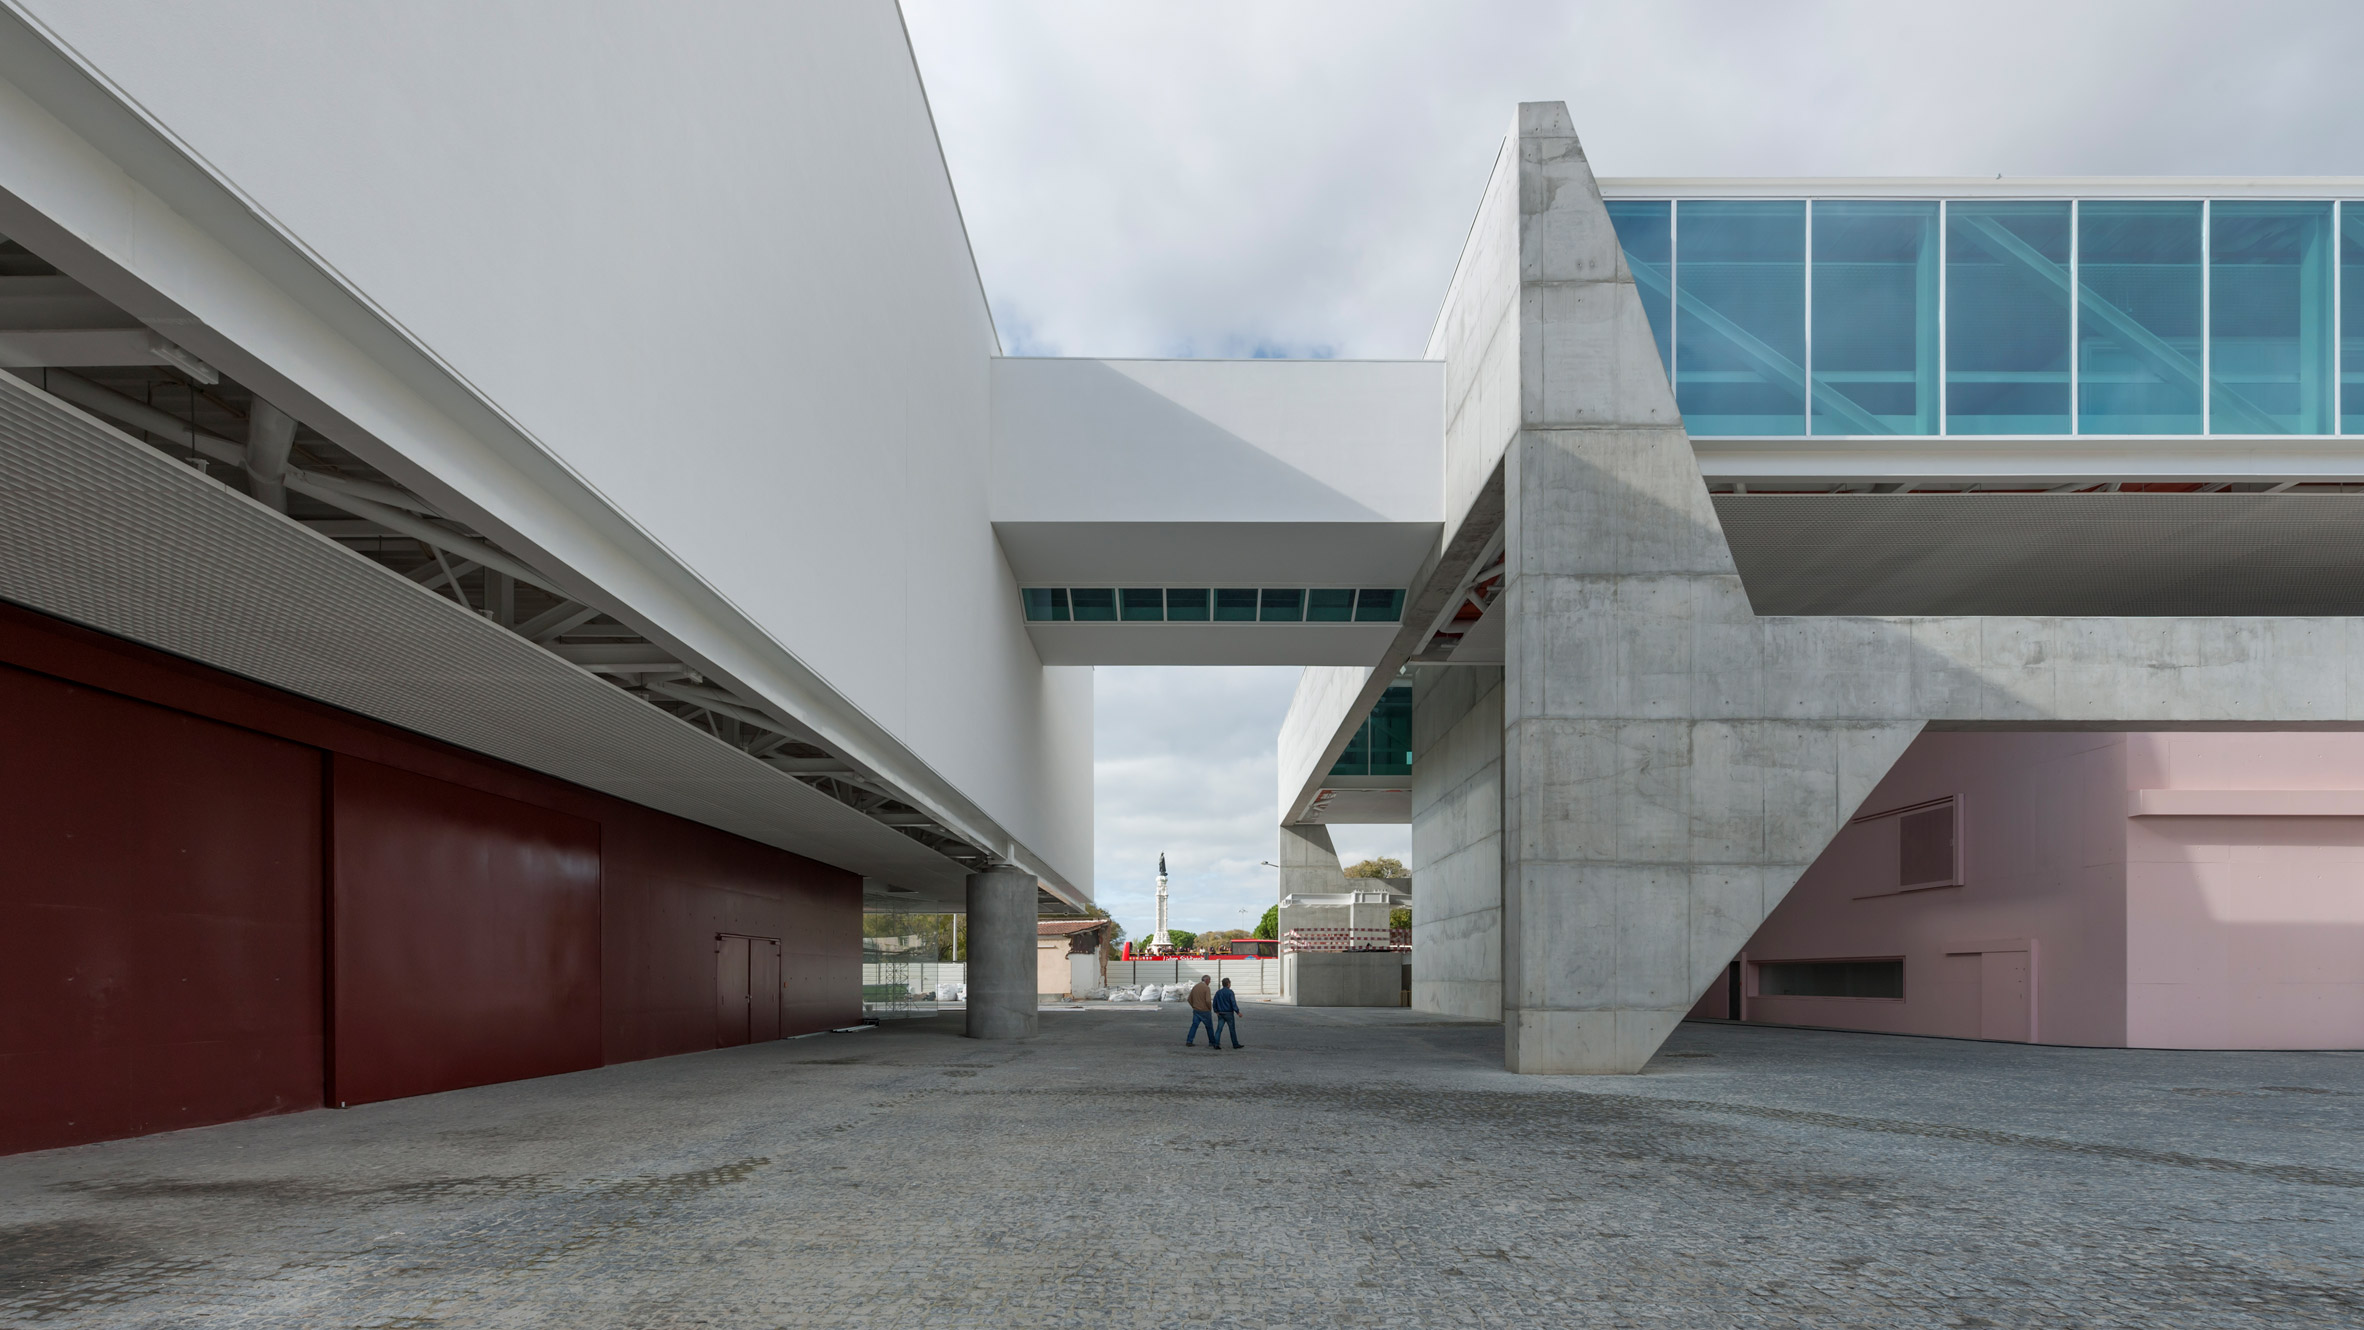 Some projects by Paulo Mendes da Rocha were designed outside of Brazil